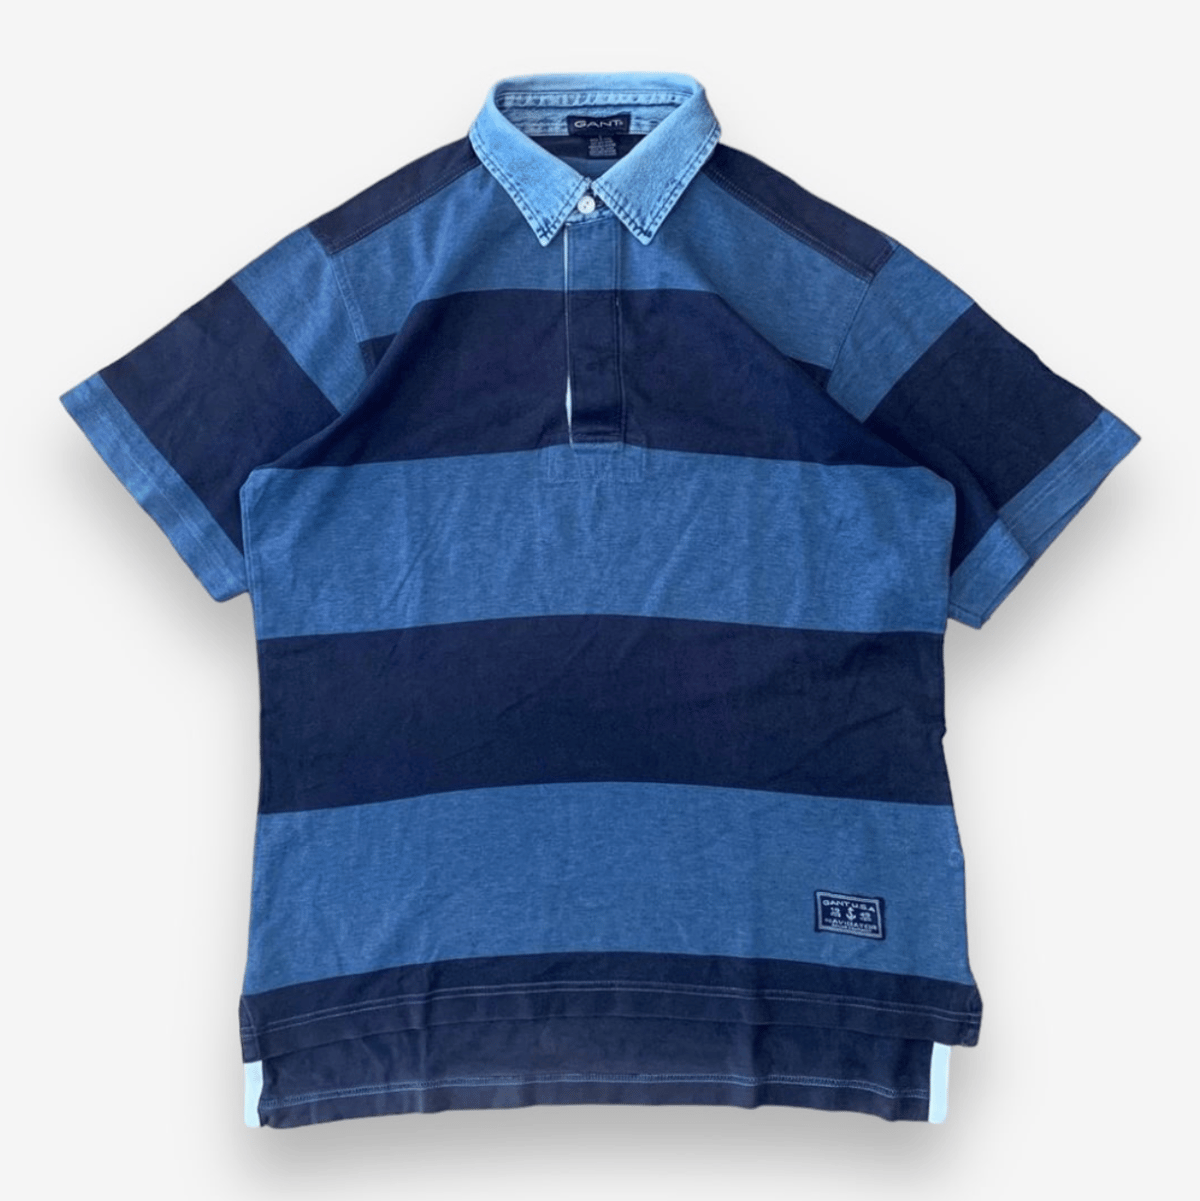 Image of Polo “Denim Striped” by Lighthouse